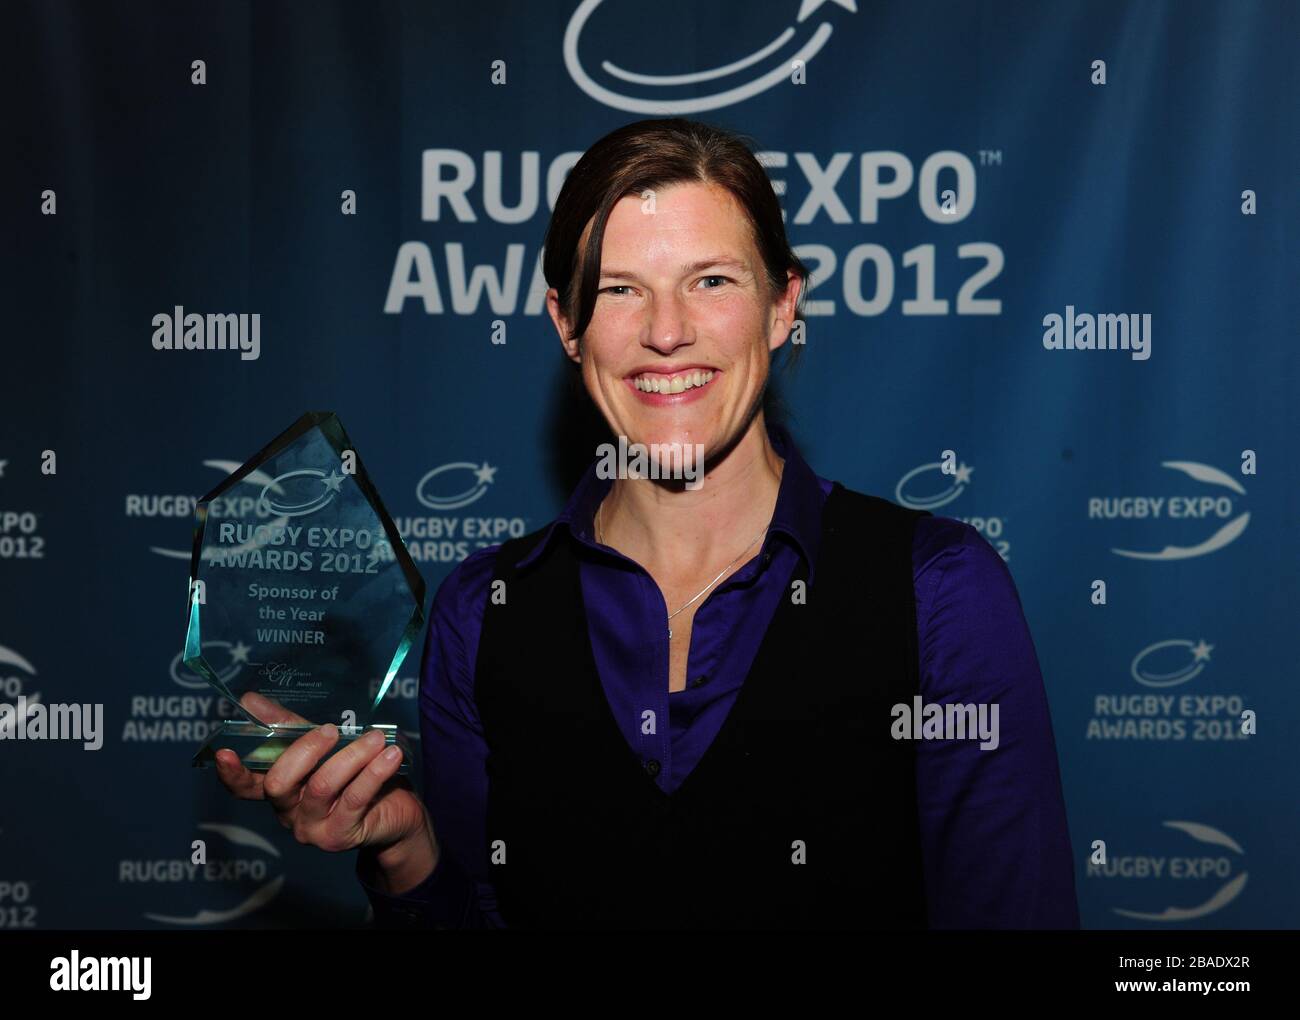 Louisa Cheetham holds the award for the Sponsor of the Year during The 2012 Rugby Expo Awards and Dinner in the LIVE Room, Twickenham. Stock Photo